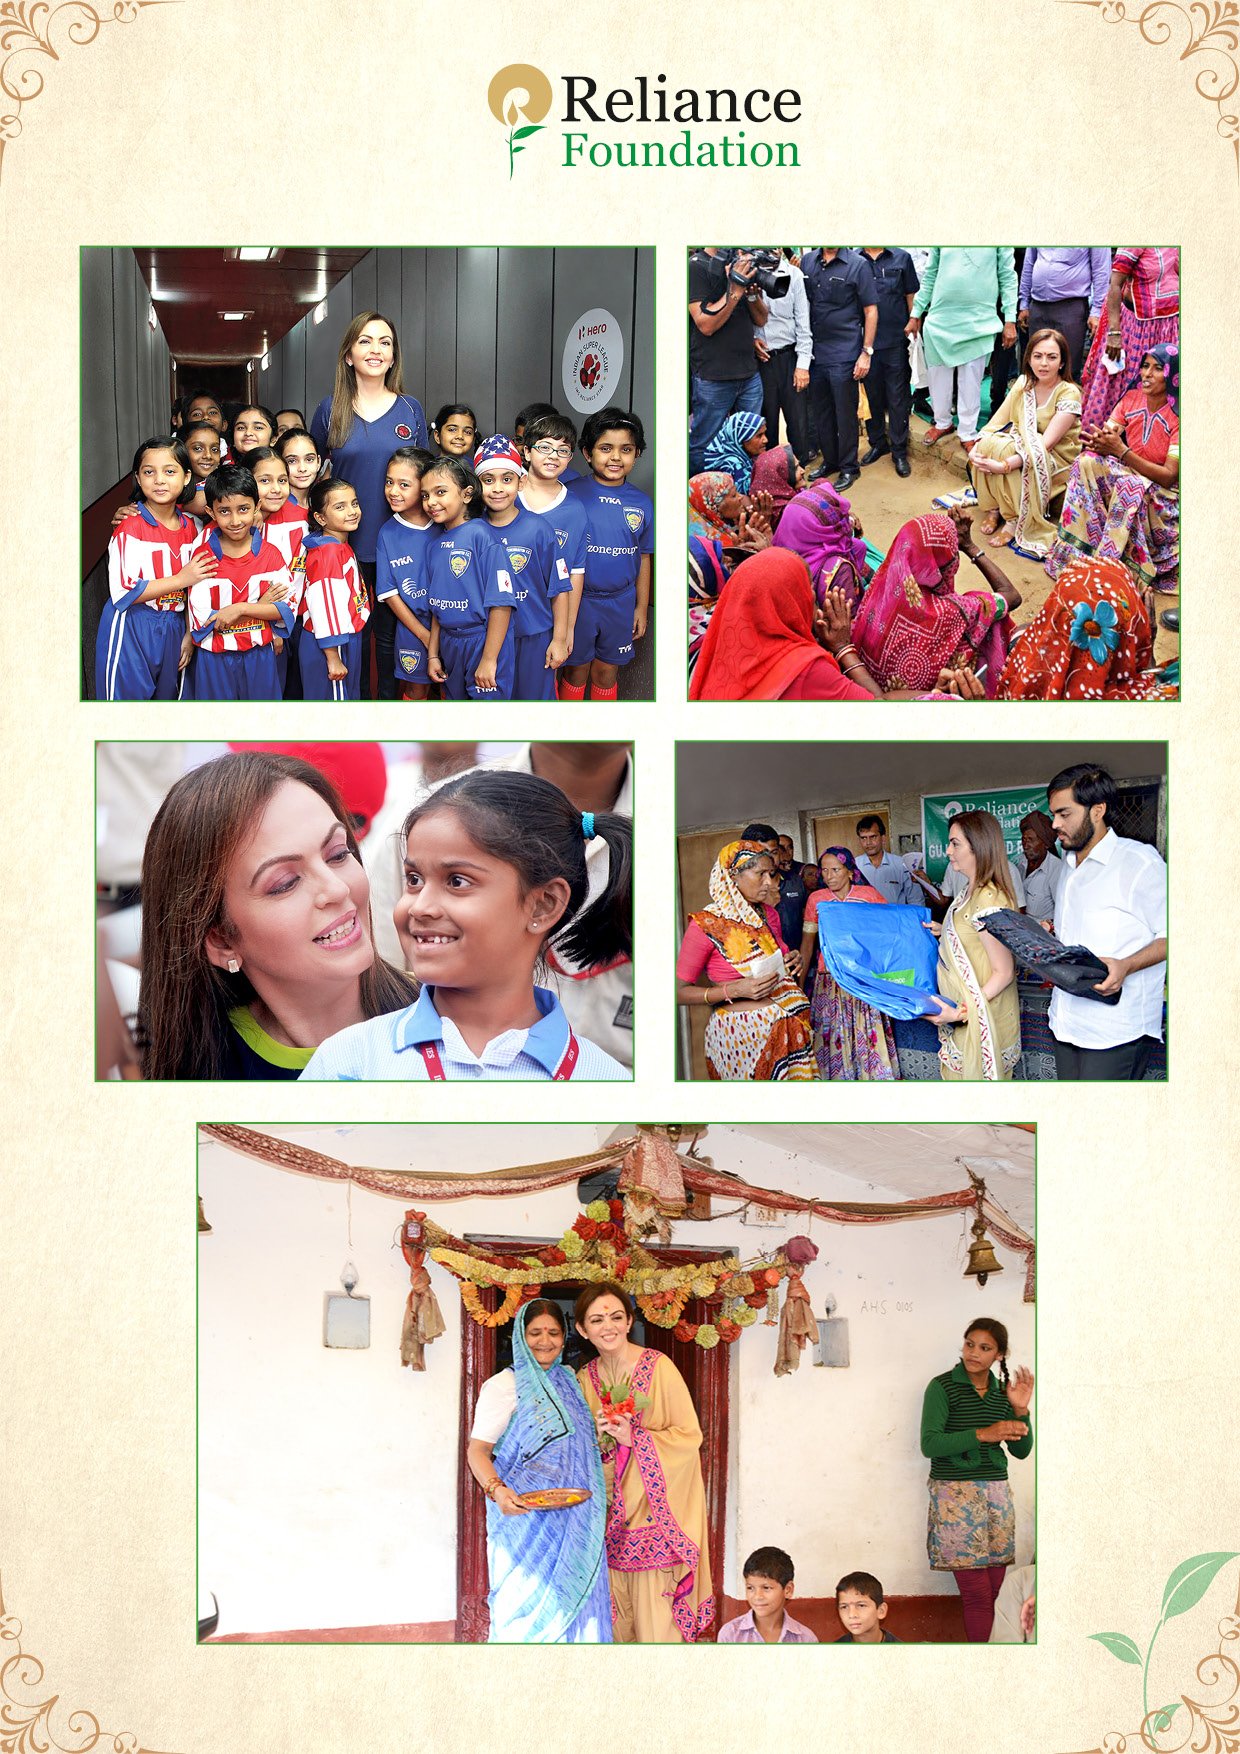  wishes our Founder and
Chairperson Smt. Nita Ambani a very Happy Birthday. 